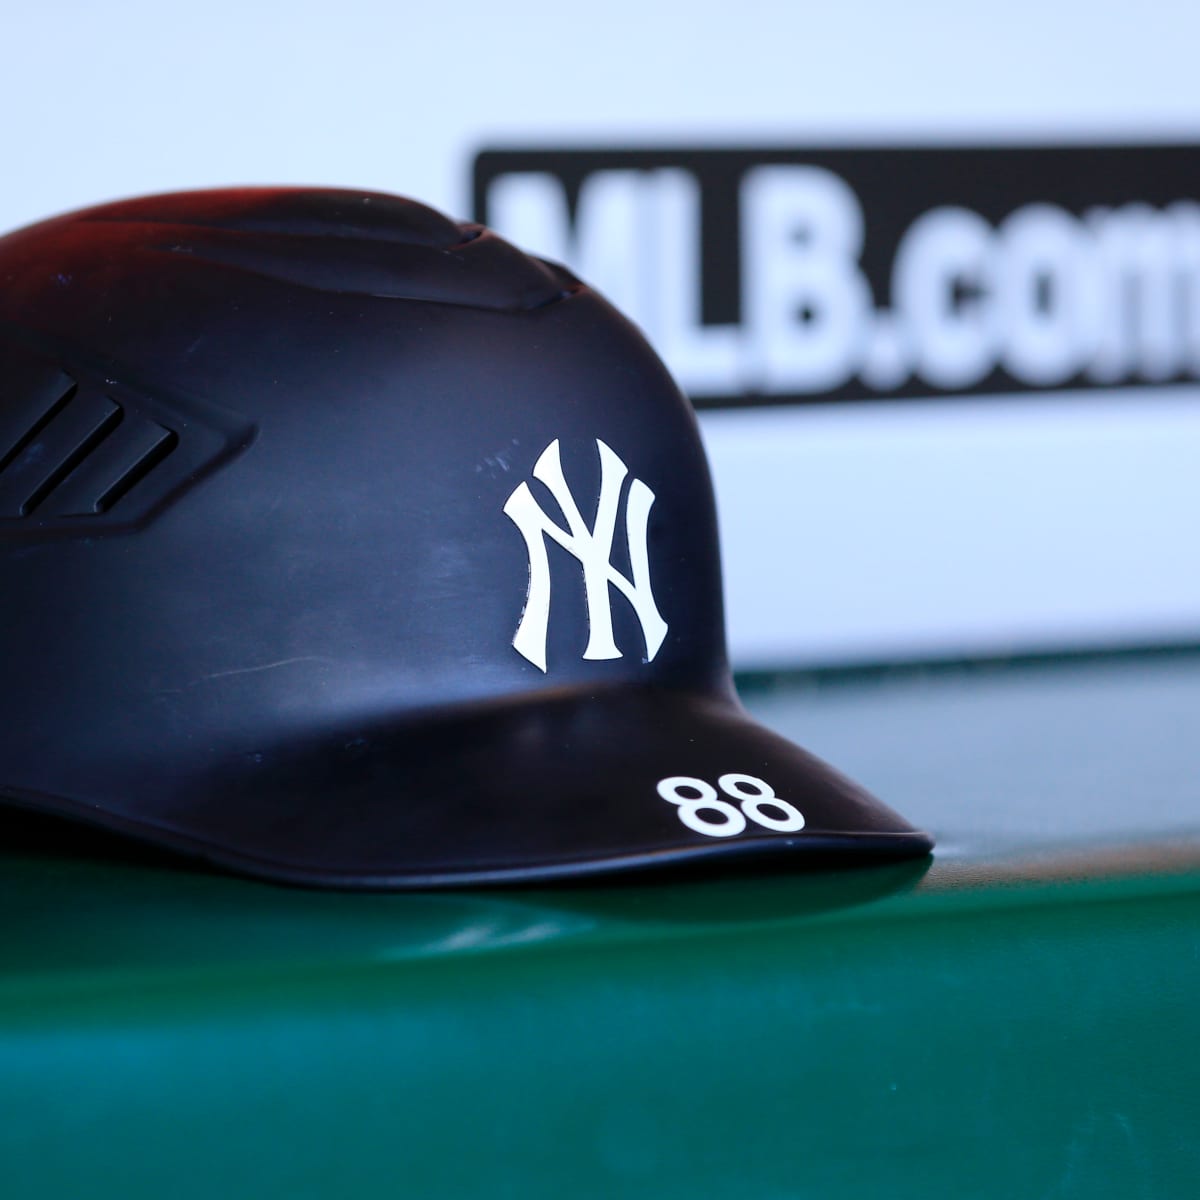 N.Y. Yankees sign Starr Insurance to sleeve patch deal